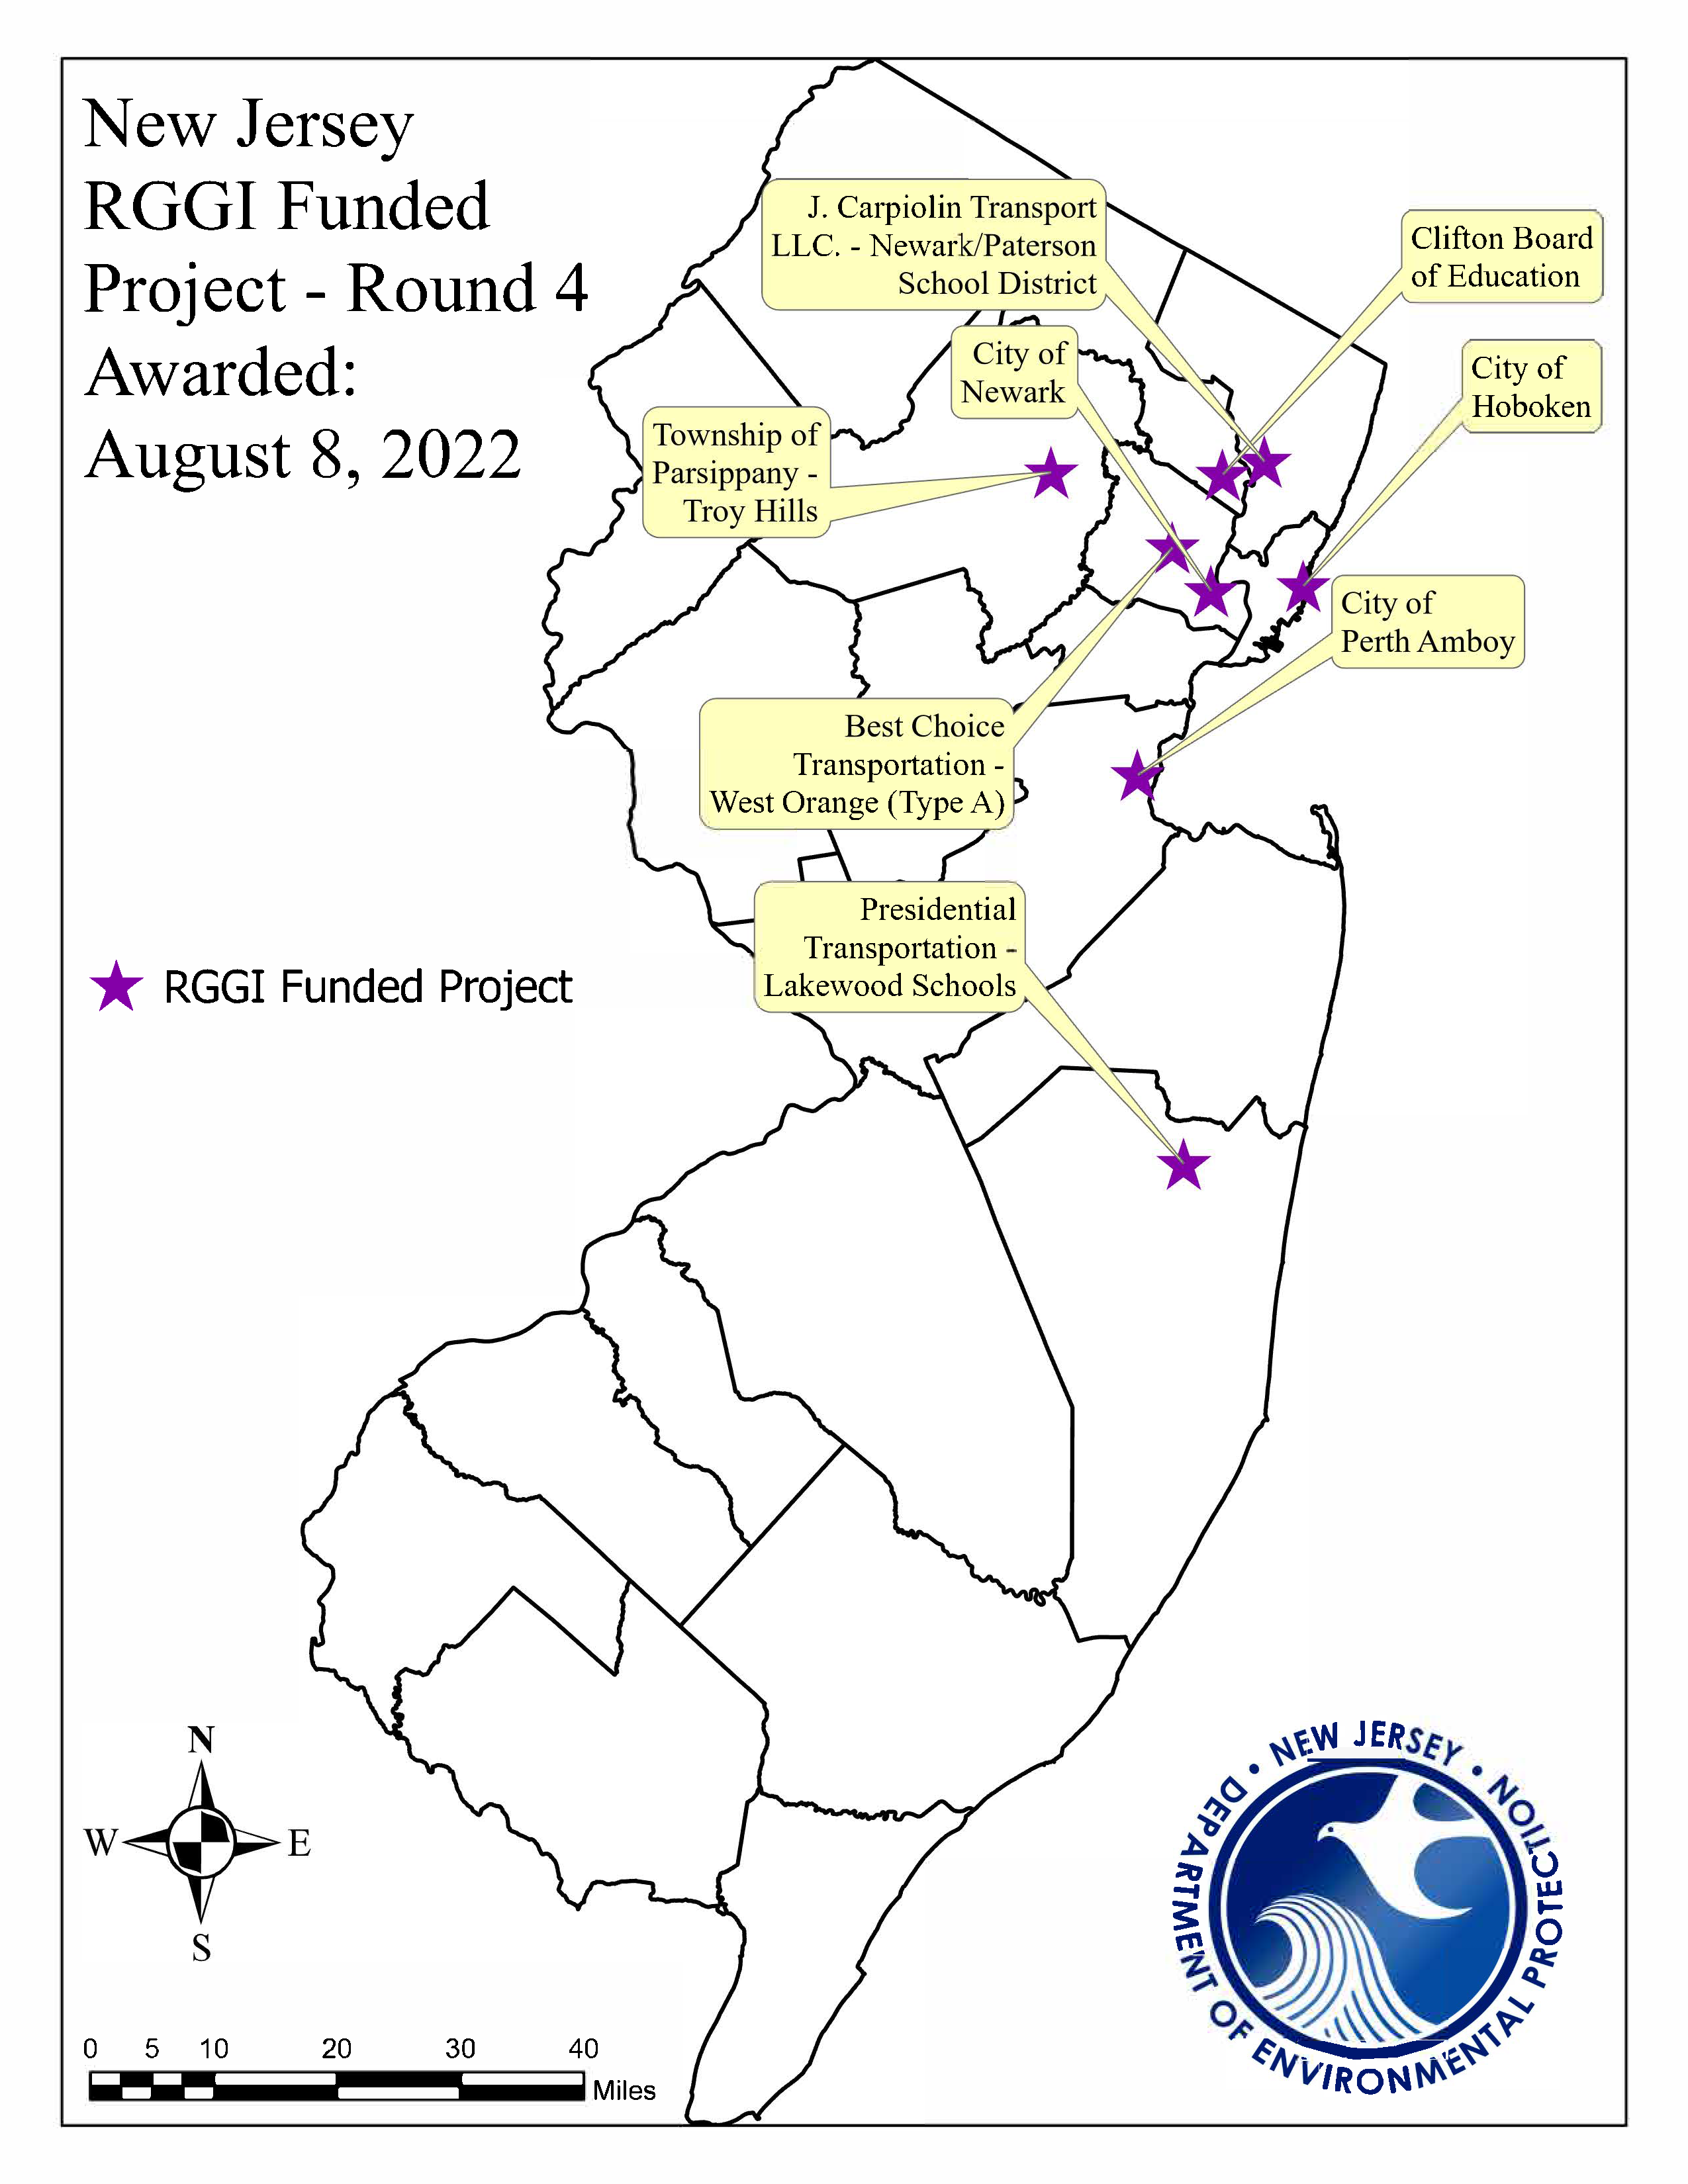 New Jersey RGGI Funded Projects - Round 4 Awarded 8/8/2022